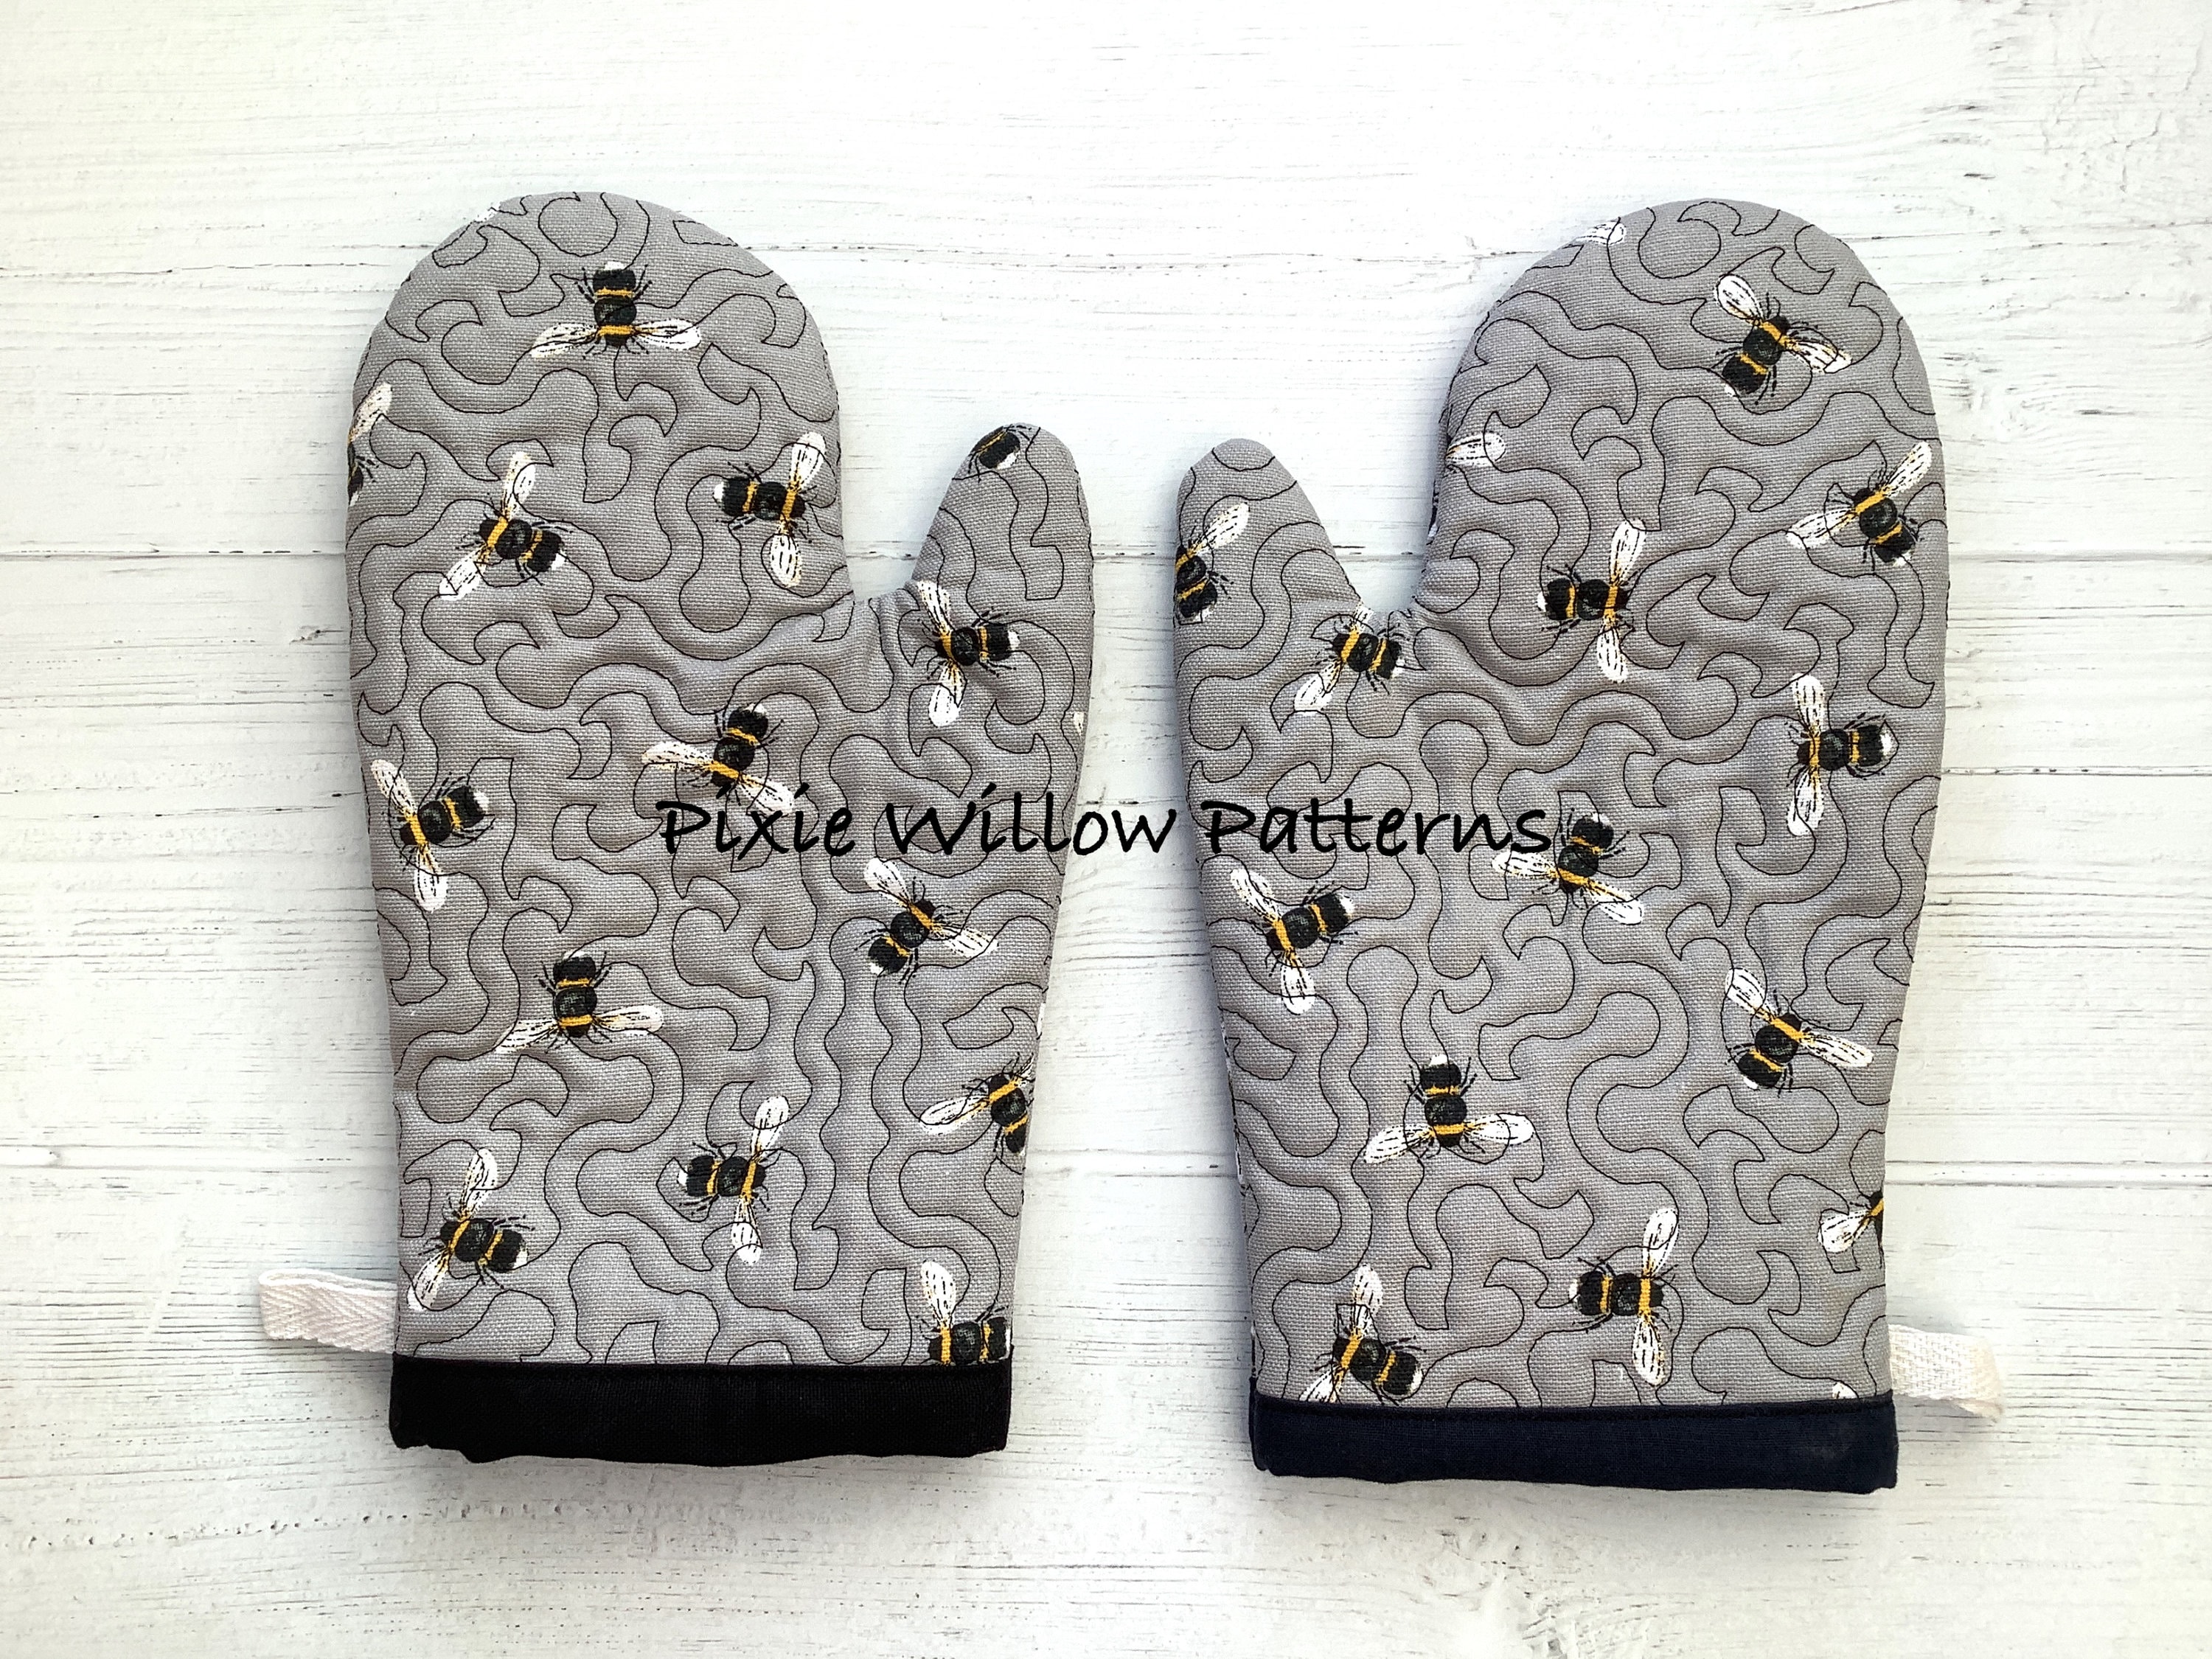 2x Embroidery File Oven Mitt Oven Mitt Baking Mitt Pot Holder ITH 20 X 36  Cm in the Hoop Oven Mitts Gloves Digital Embroidery Design 8x13 